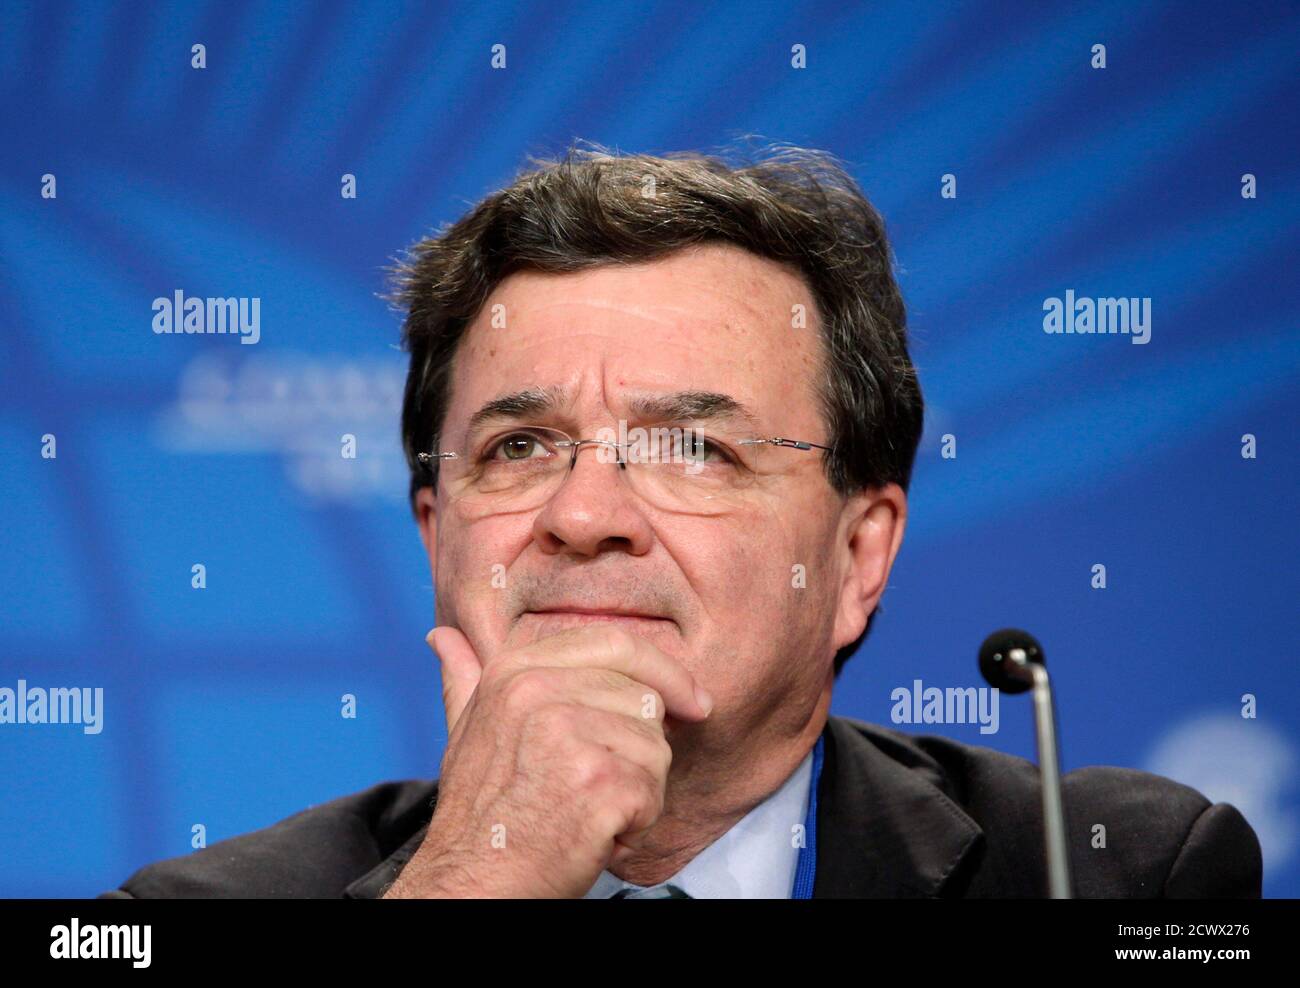 Canada's Finance Minister Jim Flaherty attends the Commonwealth Secretariat news conference during the annual IMF-World Bank meeting at the IMF headquarters in Washington October 8, 2010. REUTERS/Yuri Gripas (UNITED STATES - Tags: POLITICS BUSINESS) Stock Photo